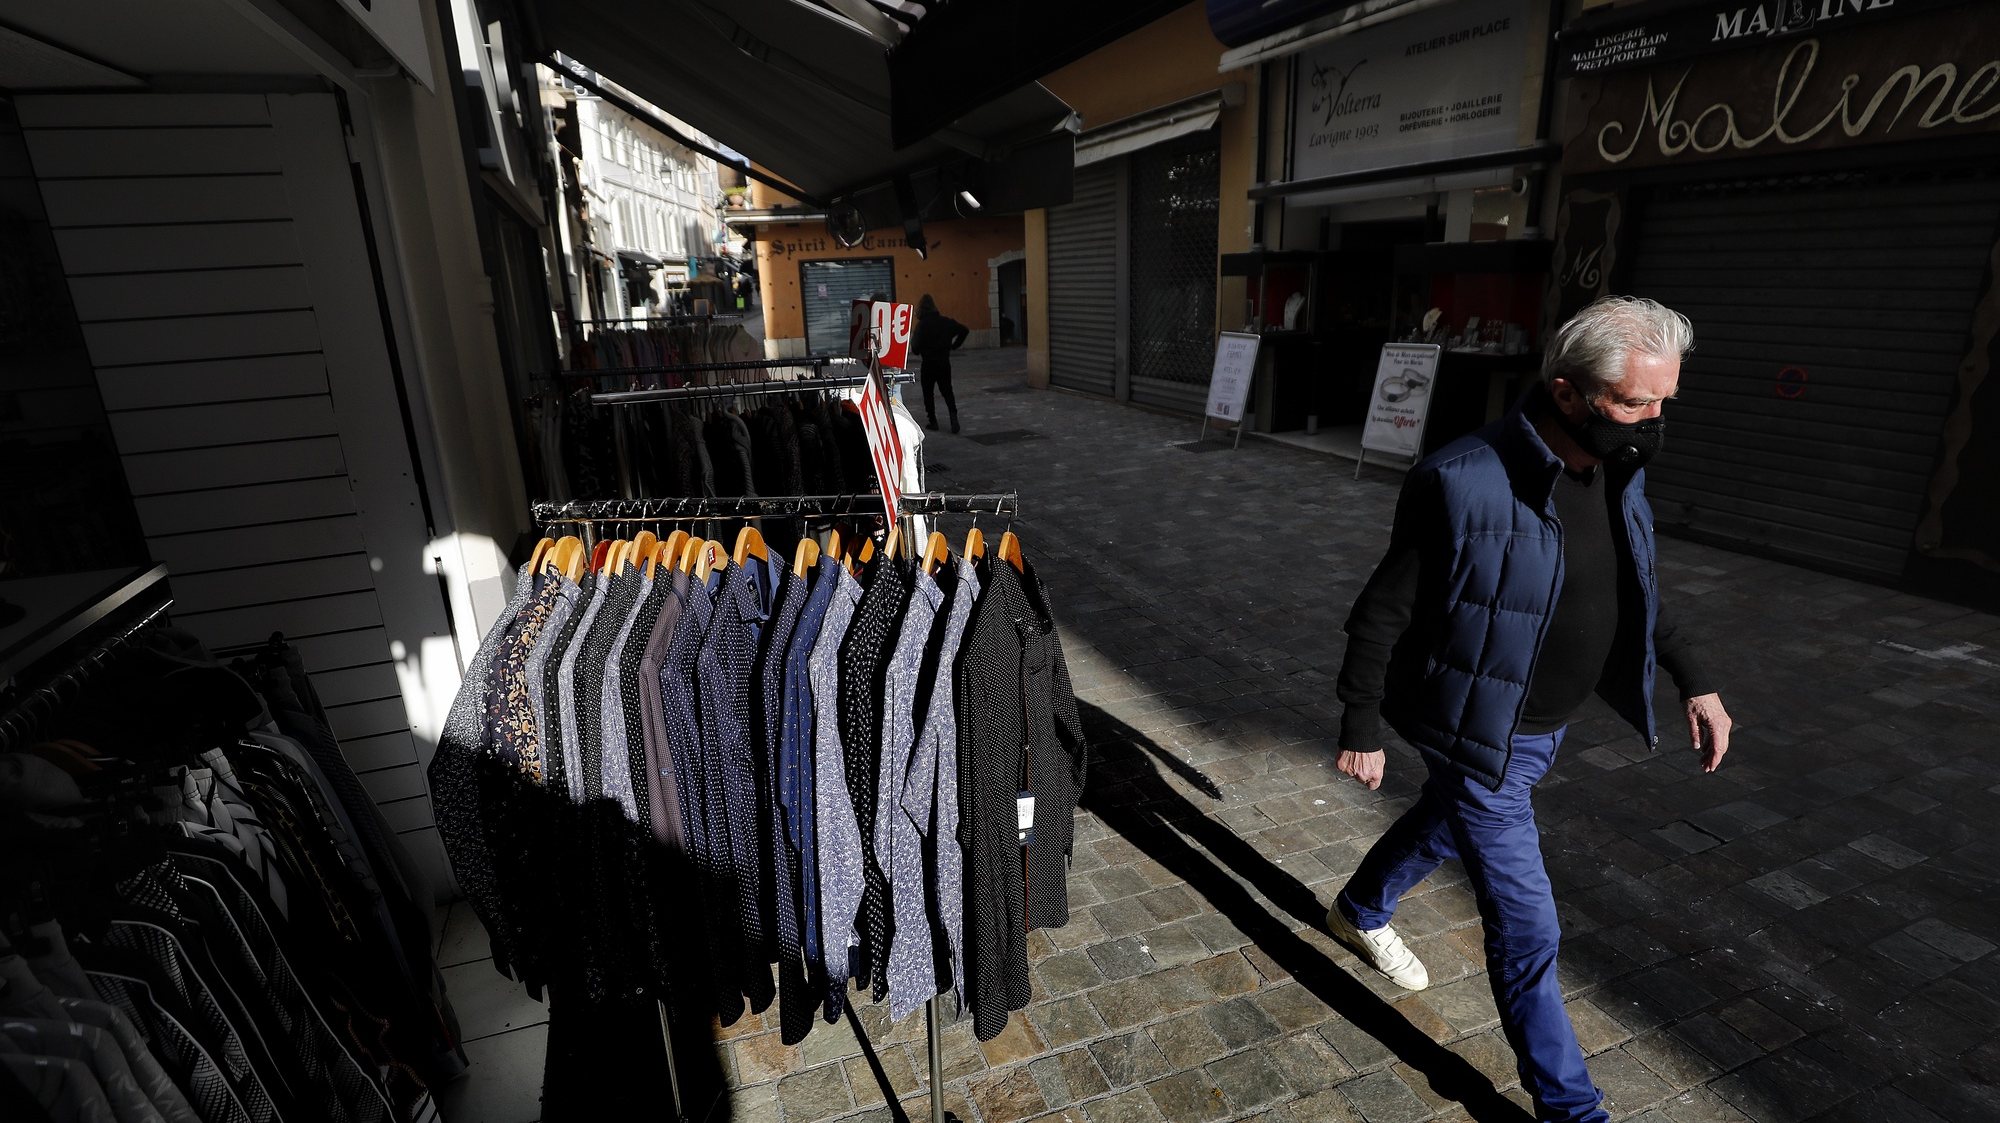 epa09097124 A man walks past a clothing store that displays these clothes on the streets during the lockdown in Cannes, France, 25 March 2021. New COVID-19 lockdown restrictions include the closure of &#039;non-essential&#039; businesses, but the town halls of Cannes, Antibes, and Menton allow the sale of non-essential outdoor businesses.  EPA/SEBASTIEN NOGIER